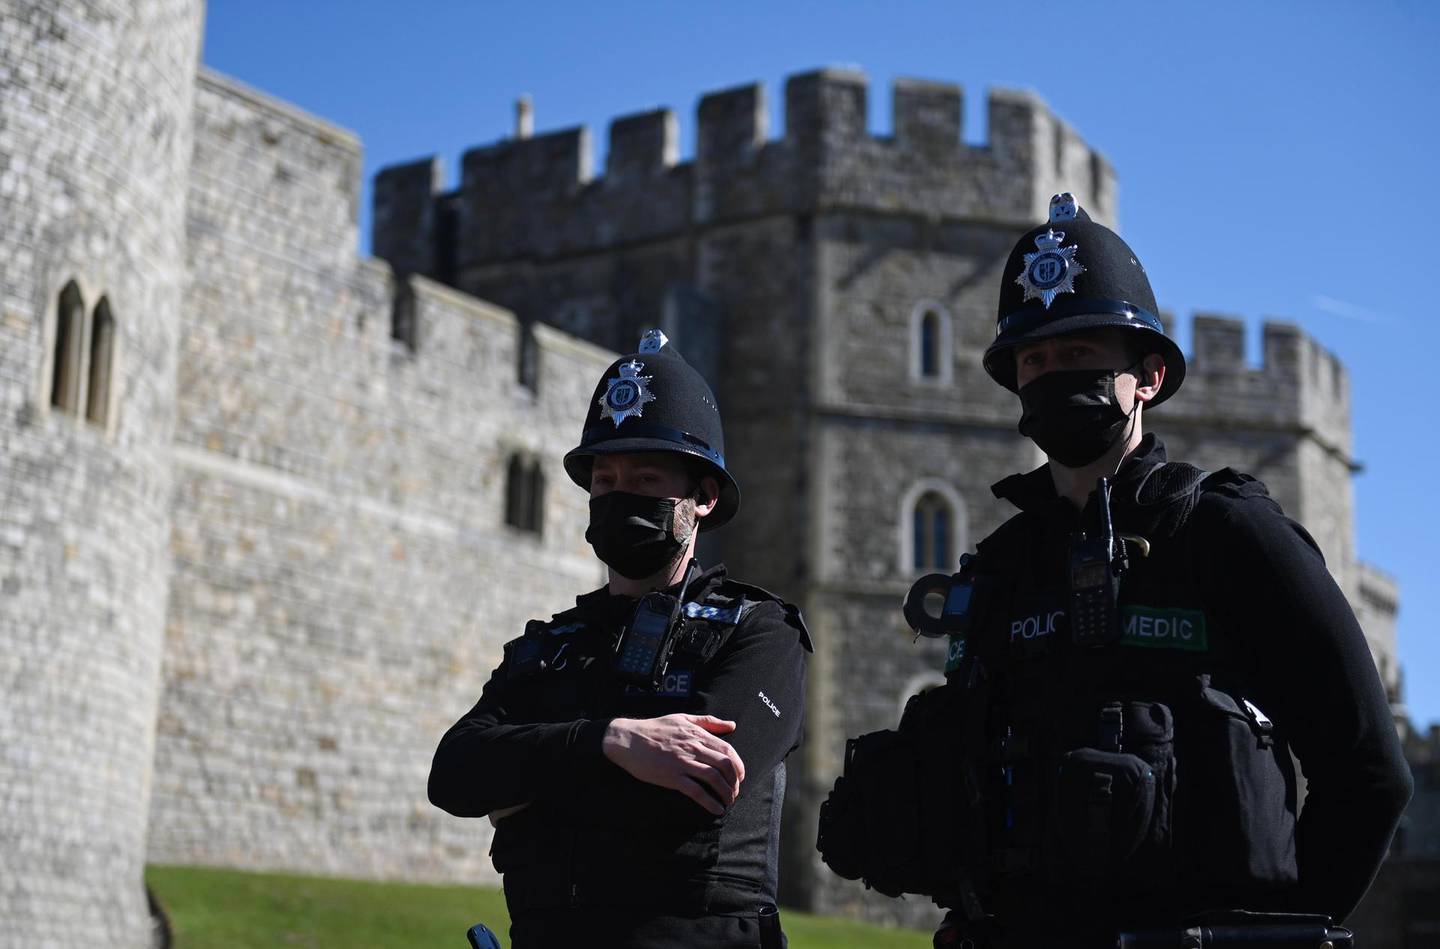 epa09140922 Police stand outside Windsor Castle in Windsor, Britain, 17 April 2021. Britain's Prince Philip, the Duke of Edinburgh, died on 09 April 2021 aged 99, his funeral is to take place on 17 April during a closed ceremony in Windsor Castle.  EPA/NEIL HALL